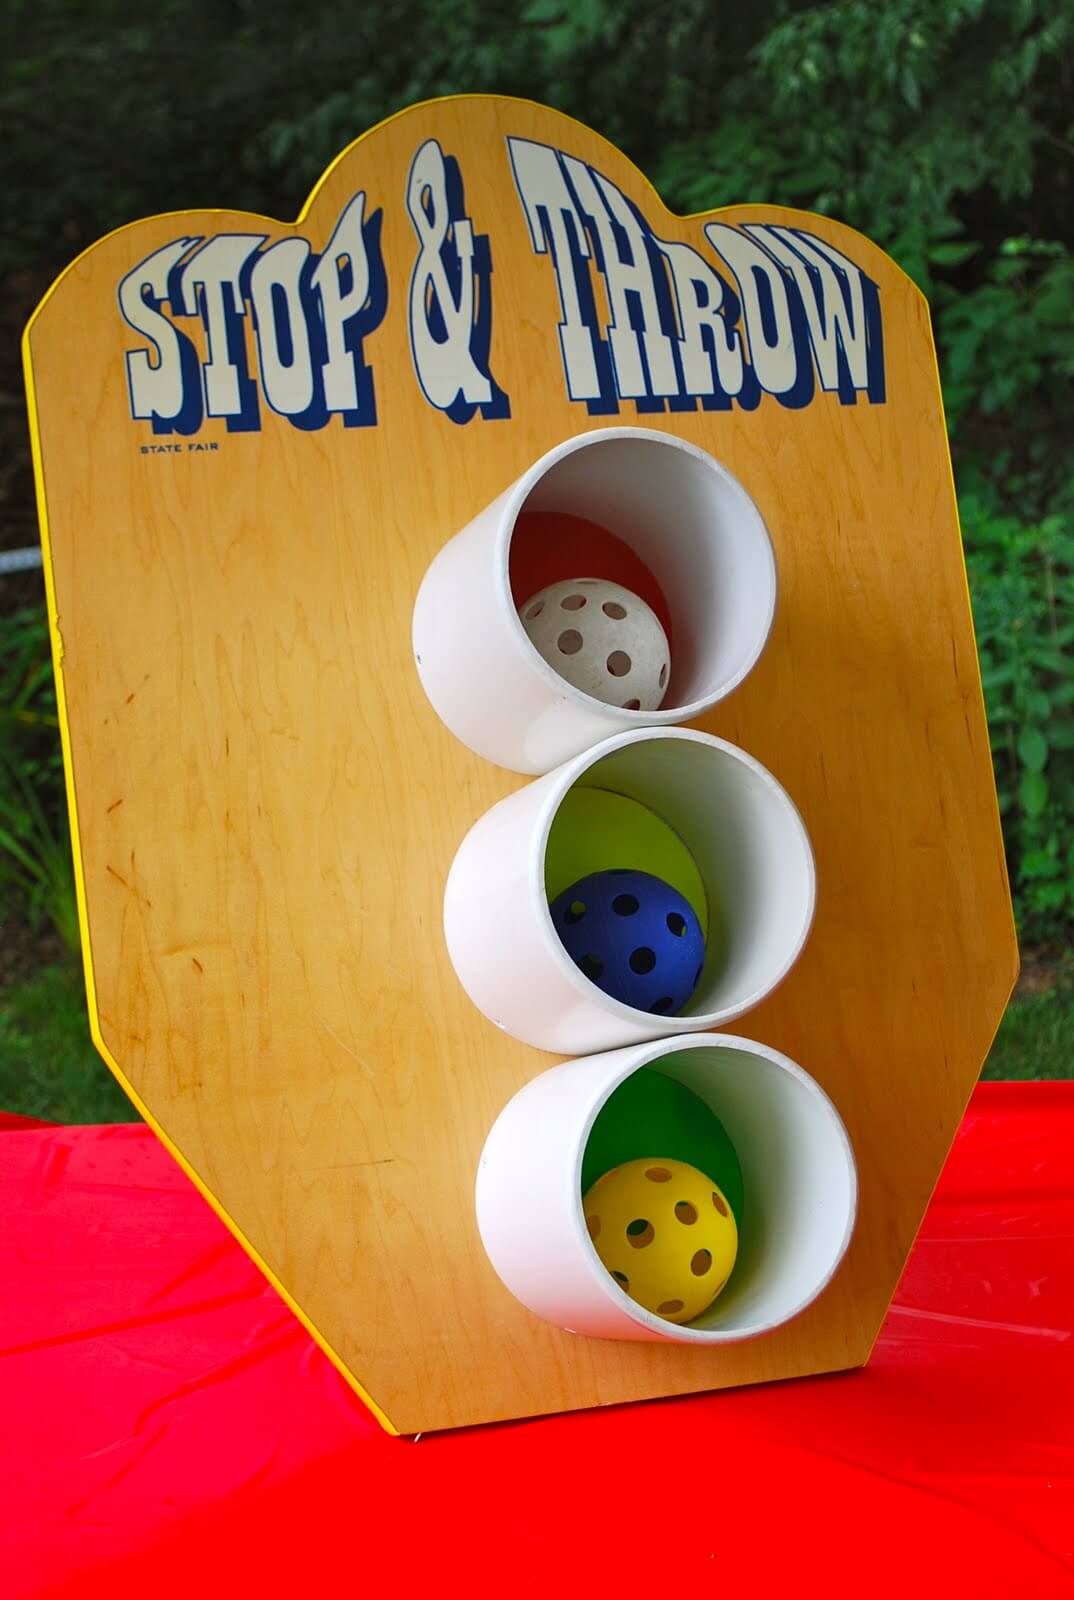 Stop and Throw Skee Ball Carnival Game